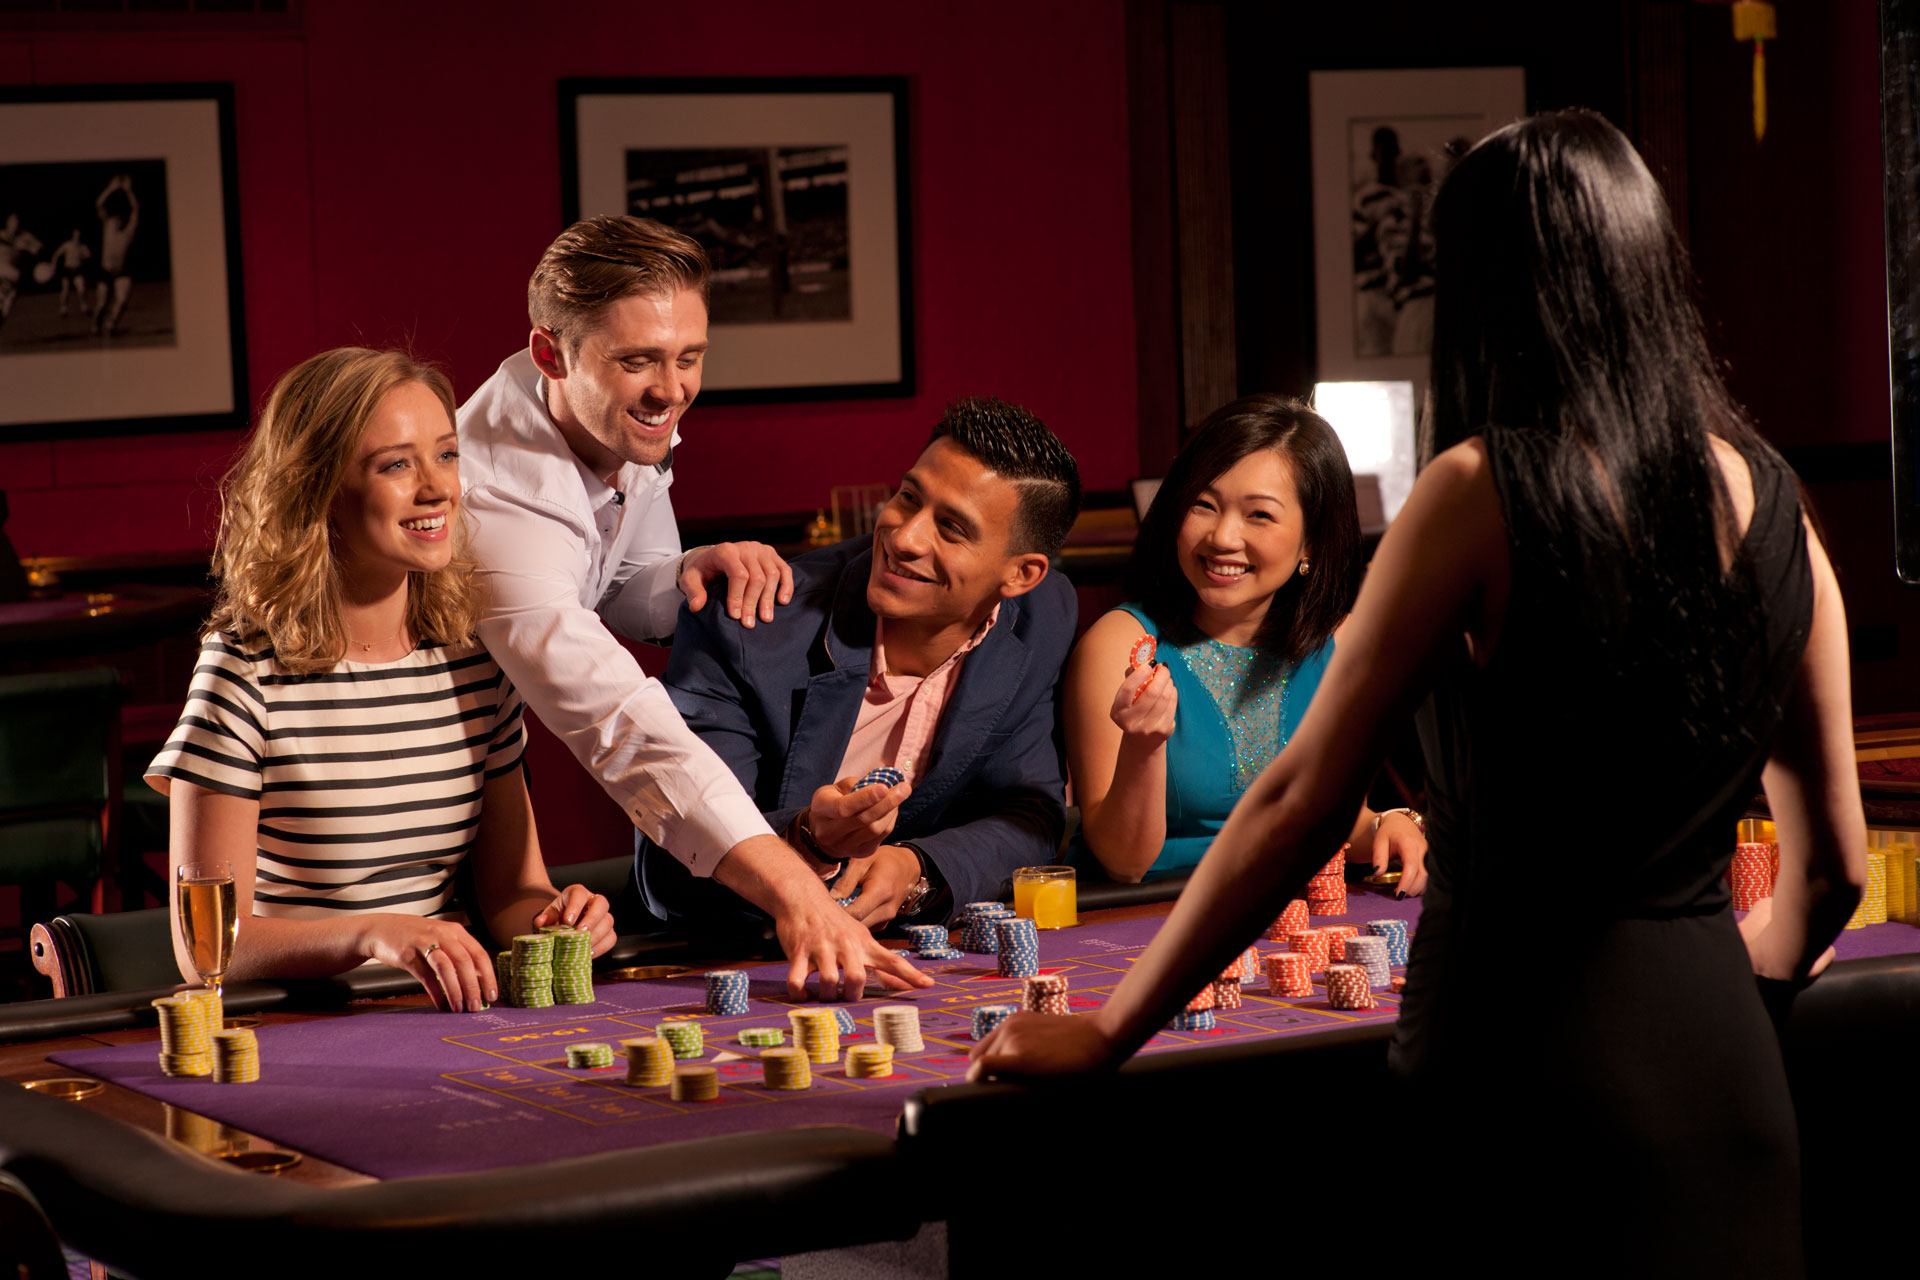 Outstanding Casino Site to Have Fun Online